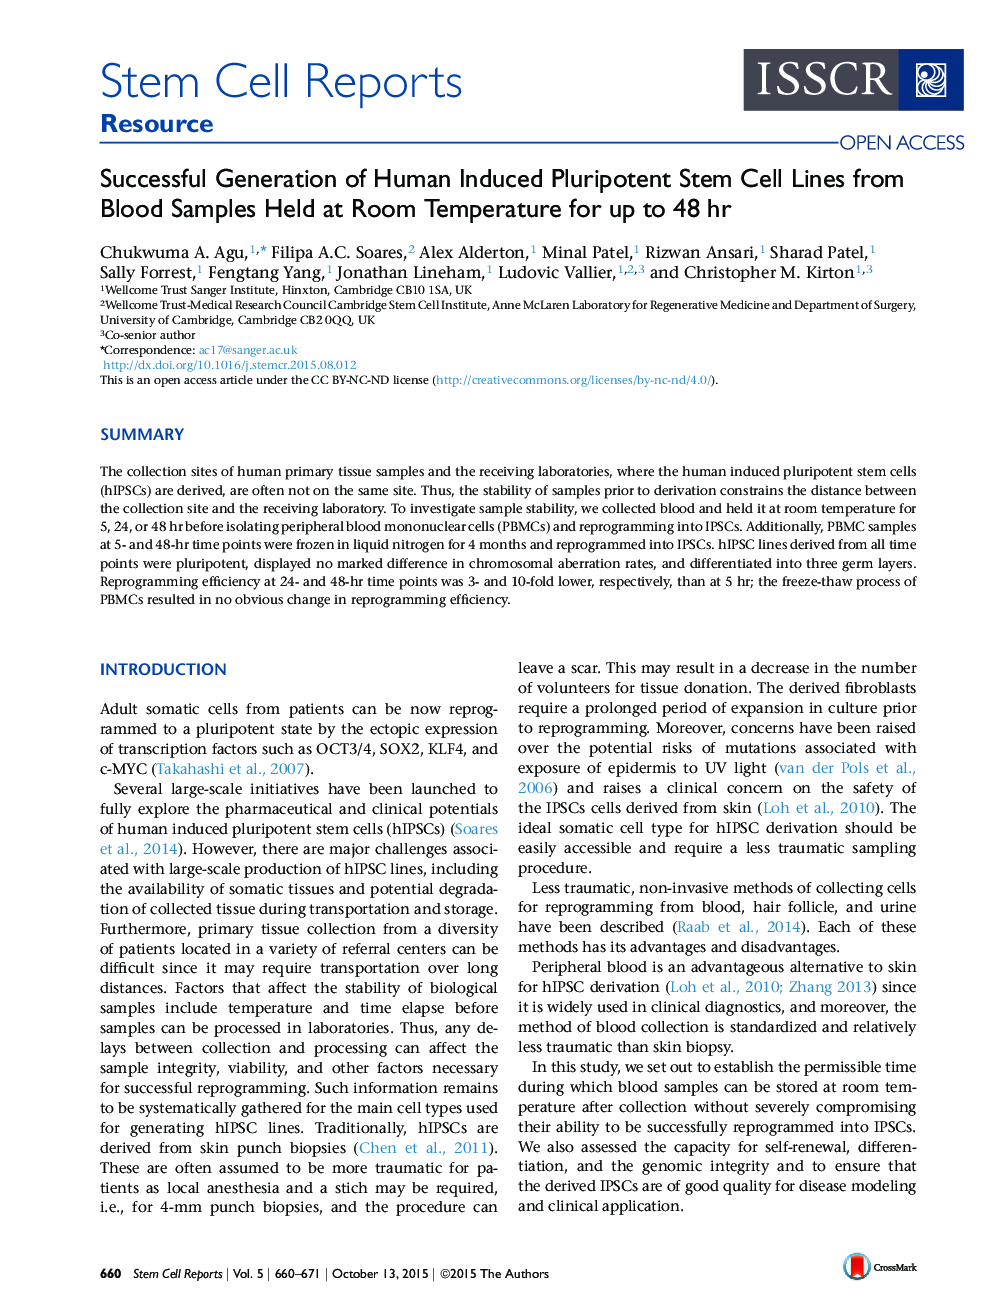 Successful Generation of Human Induced Pluripotent Stem Cell Lines from Blood Samples Held at Room Temperature for up to 48 hr 